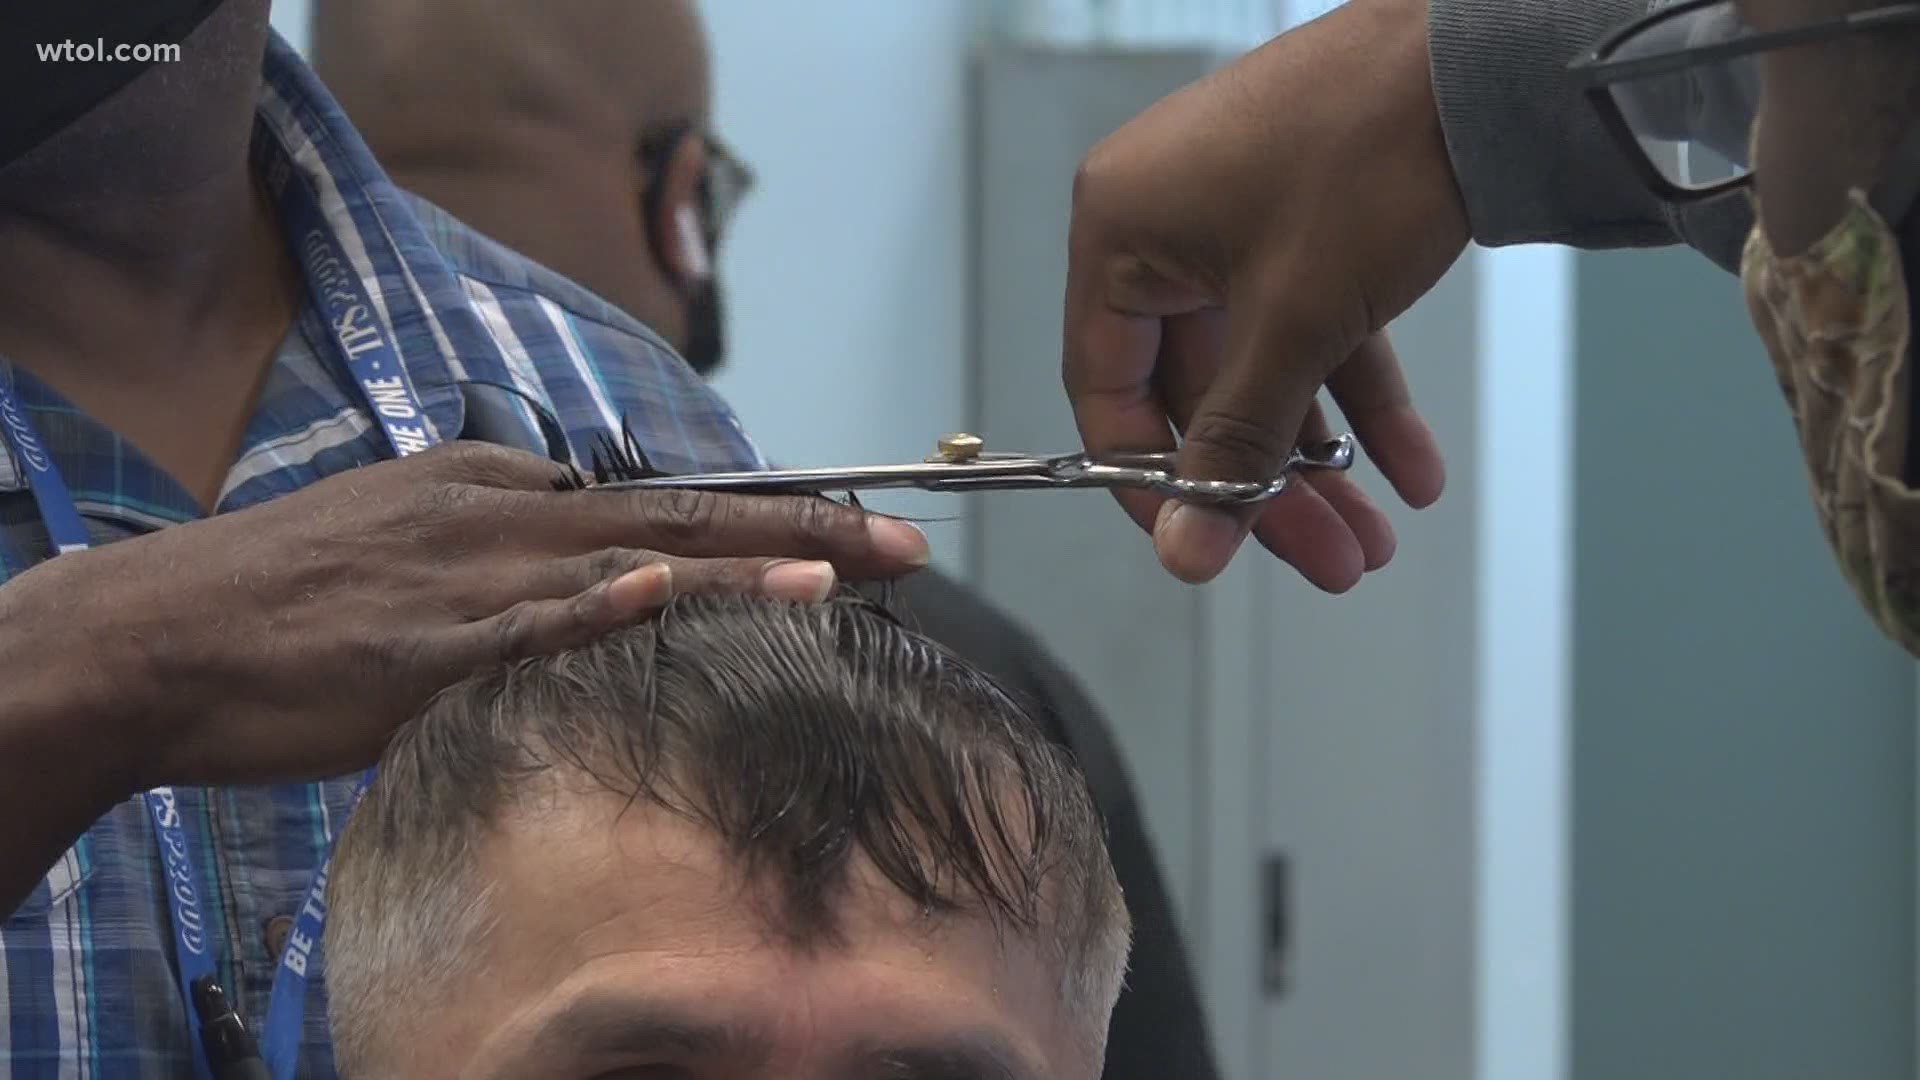 The TPS Barber Academy has reopened after the coronavirus shut their doors in March. Now, the academy is trying to get people to fill their seats and help students.